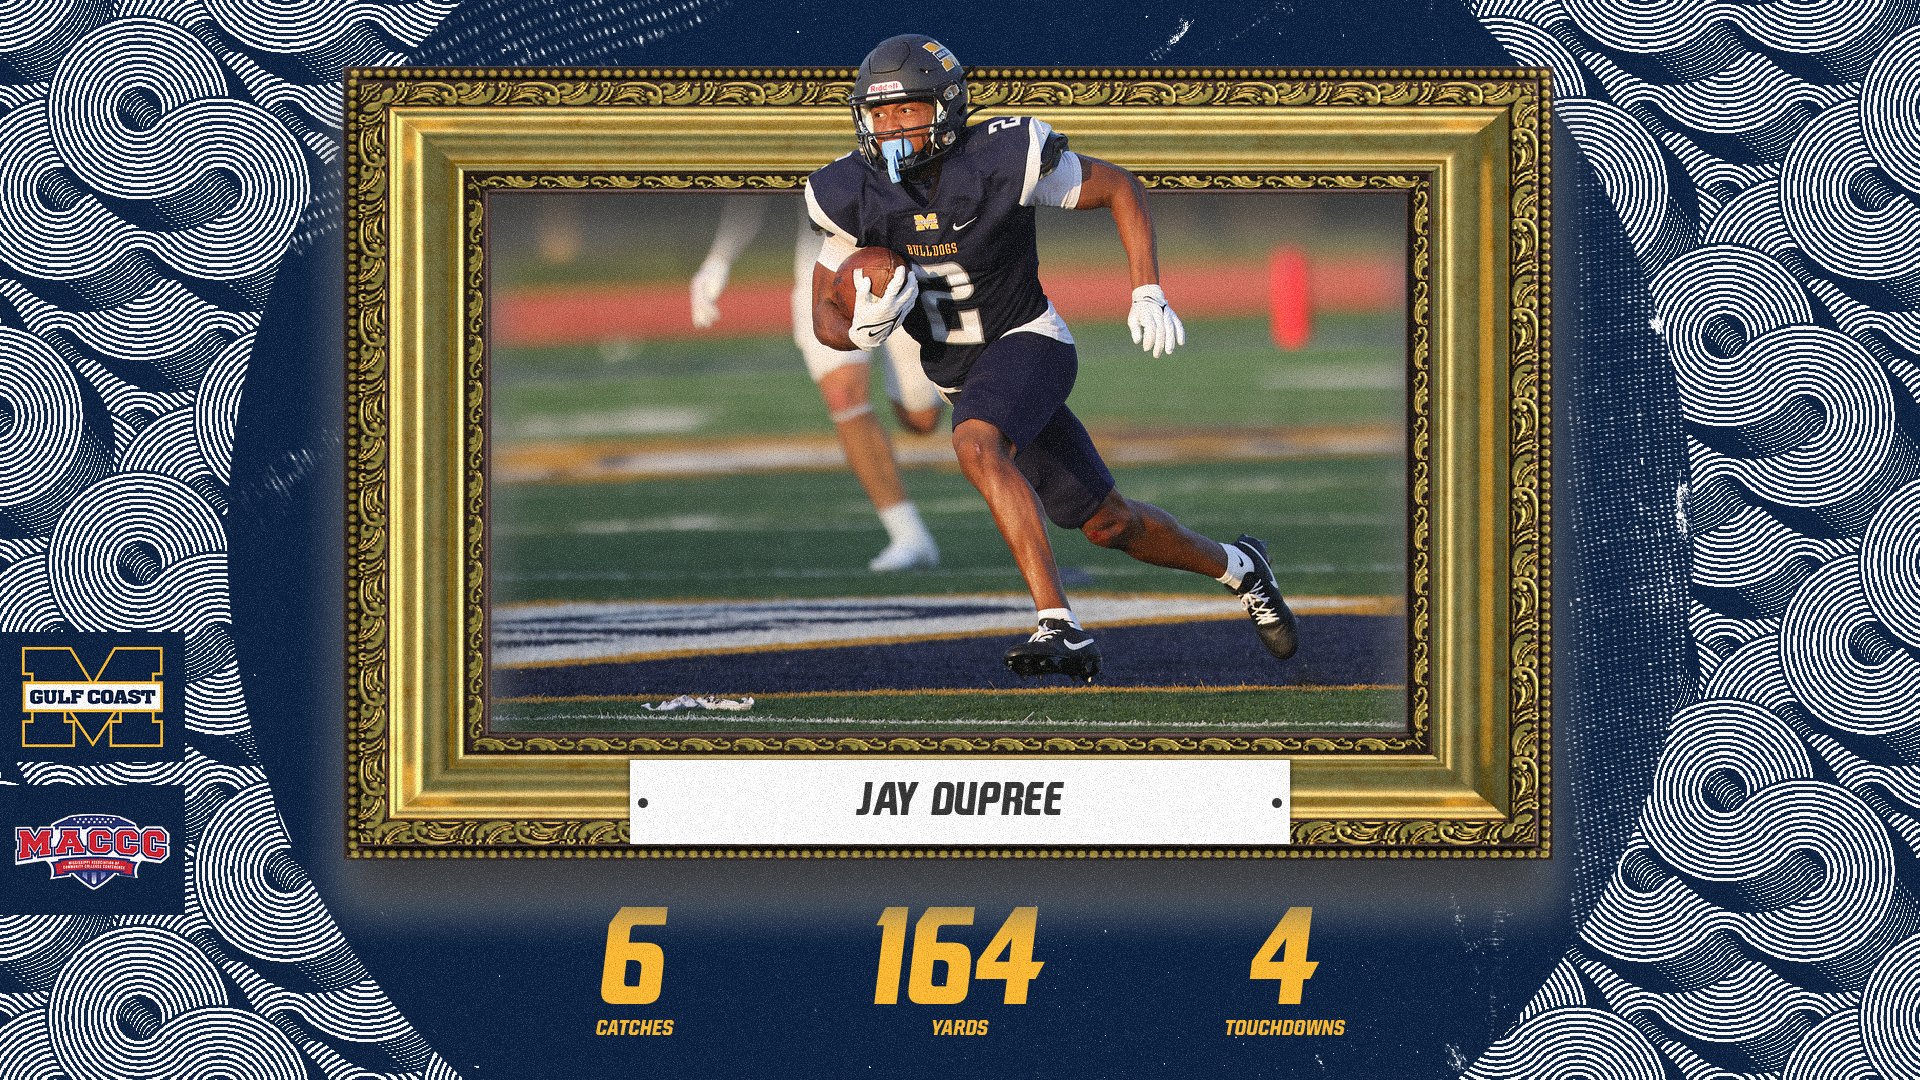 Dupree wins MACCC Player of the Week